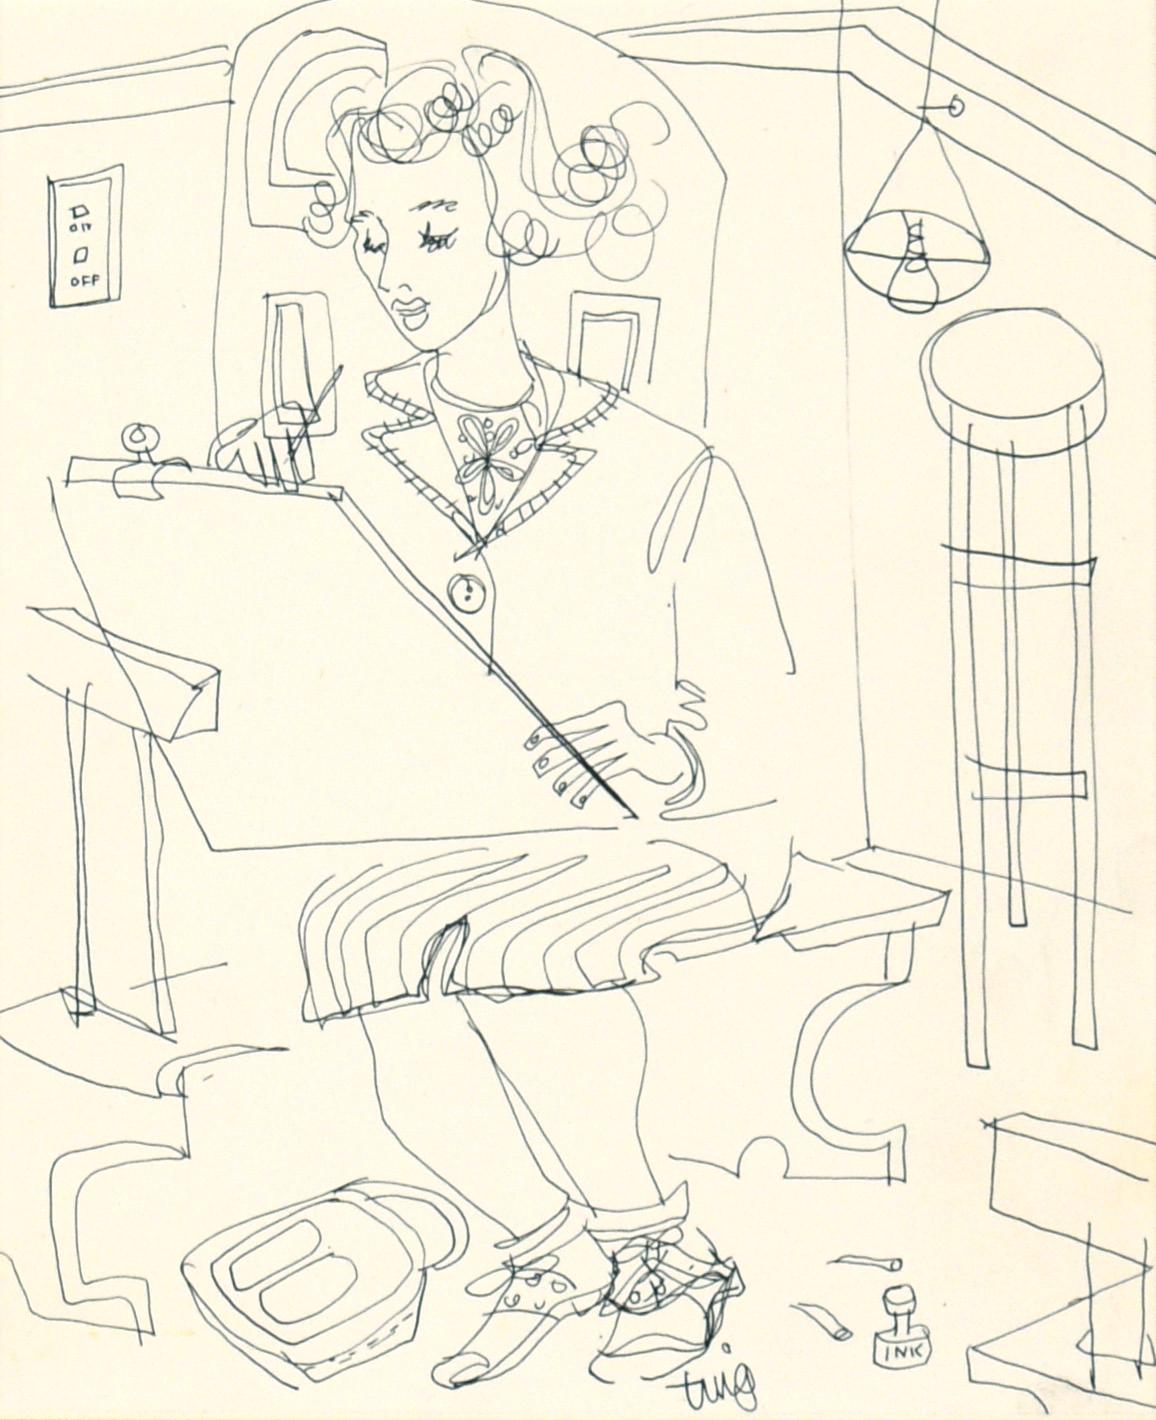 The Artist at Her Easel - Figurative Drawing in Pen on Paper

Stylized figurative drawing by unknown artist 